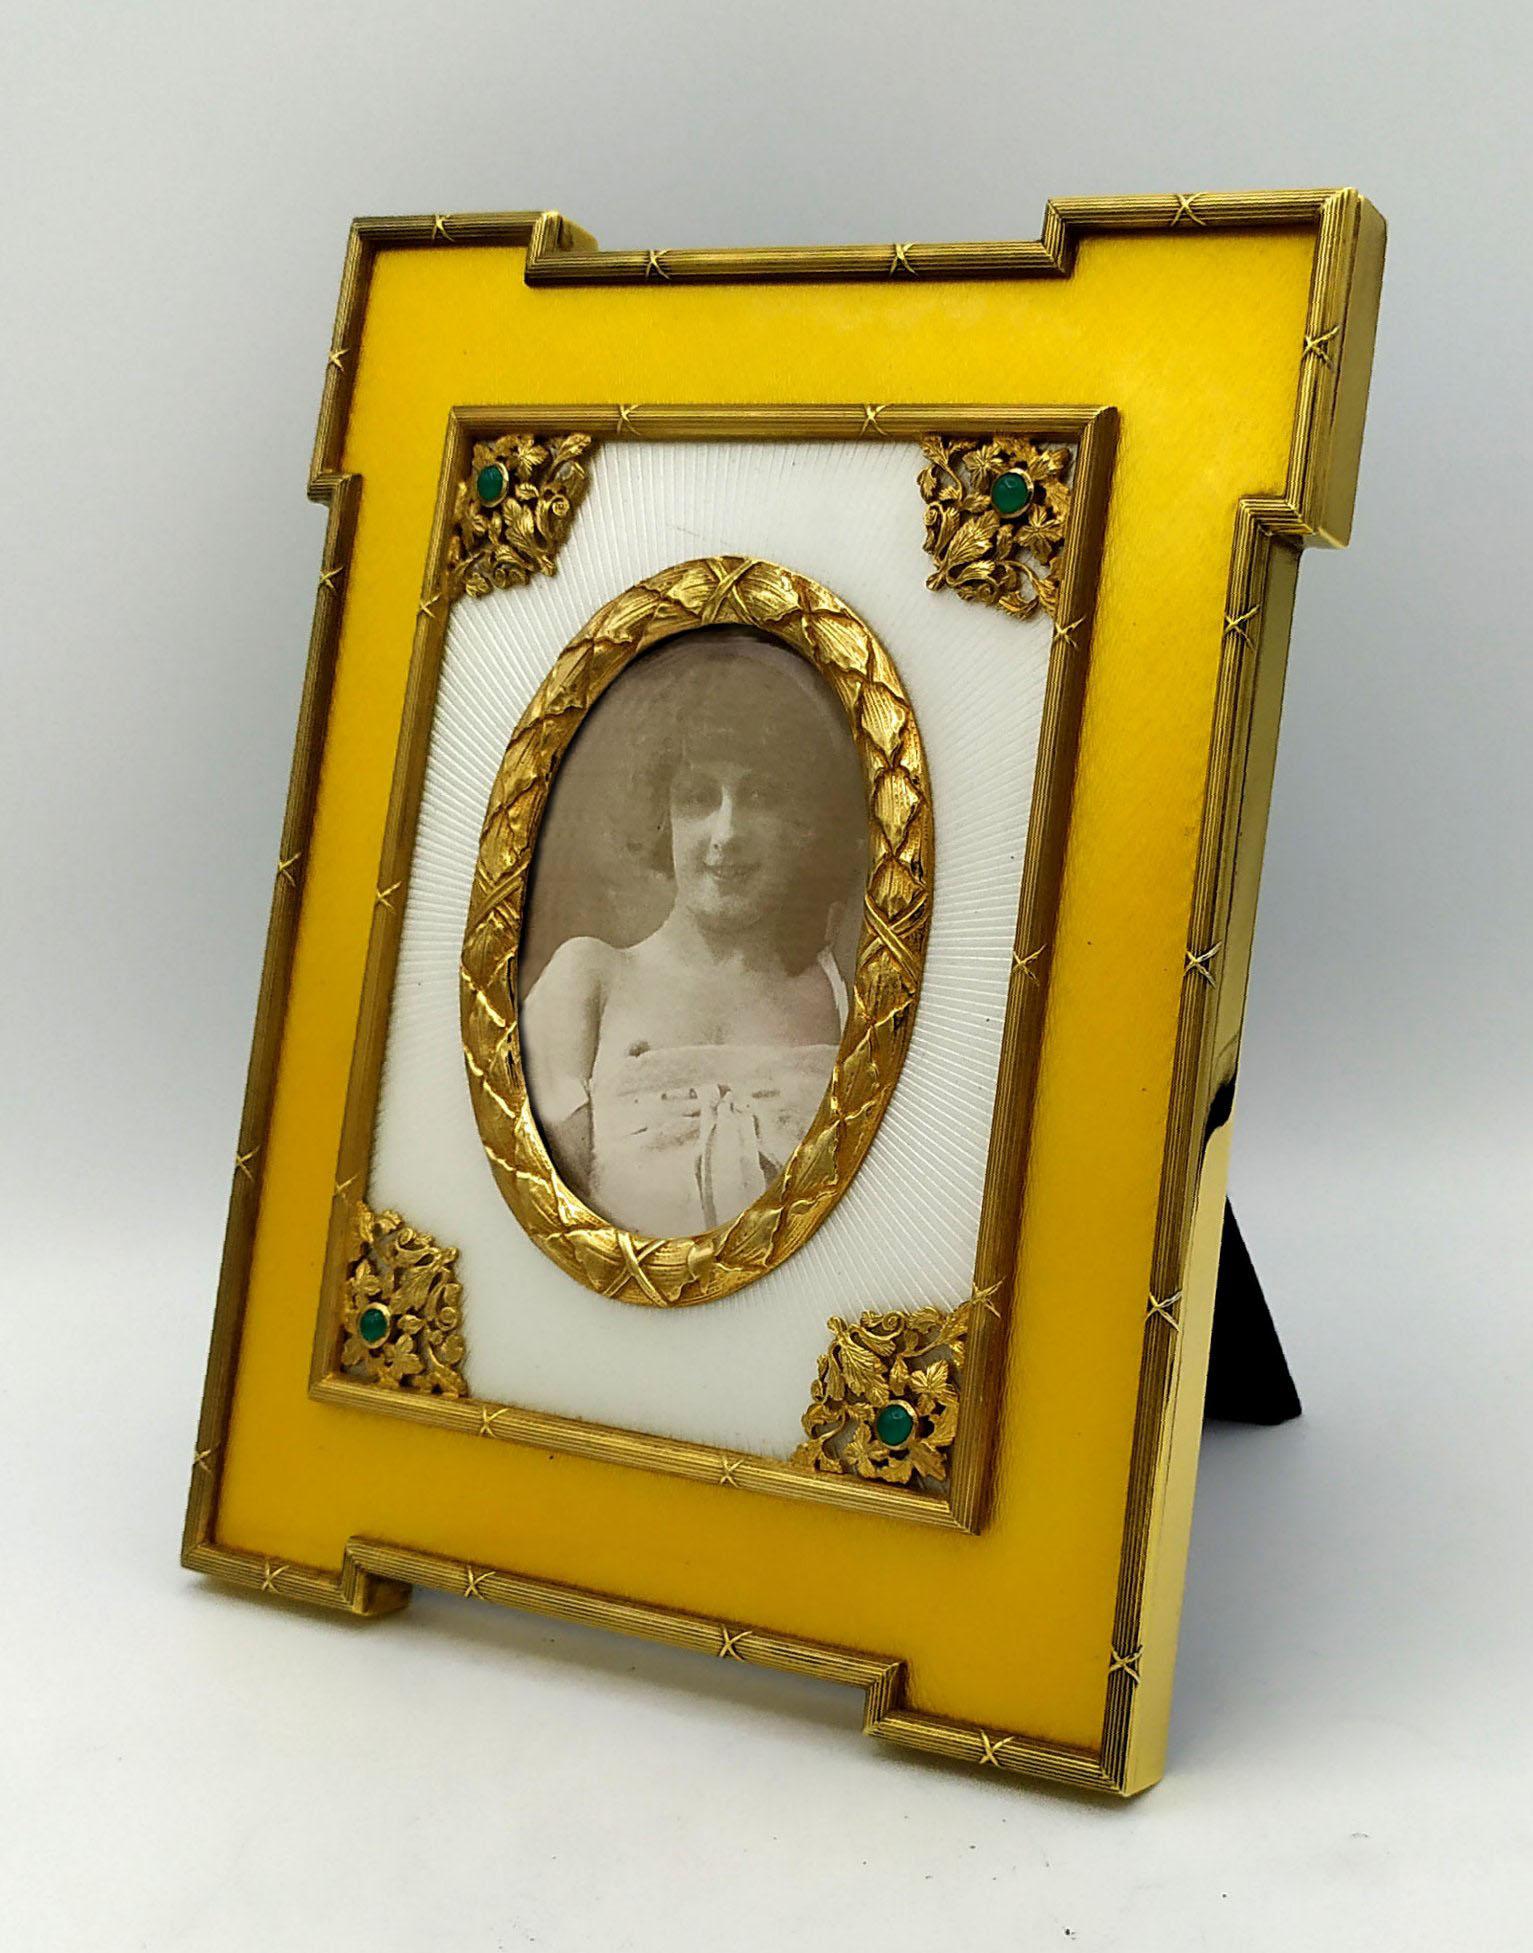 Large shaped photo frame in 925/1000 sterling silver gold plated with translucent two-tone fired enamel on guillochè and with various ornaments in Louis XVI French Empire style and 4 round cabochon emeralds mm. 5. External dimensions cm. 18.5 x 21.5